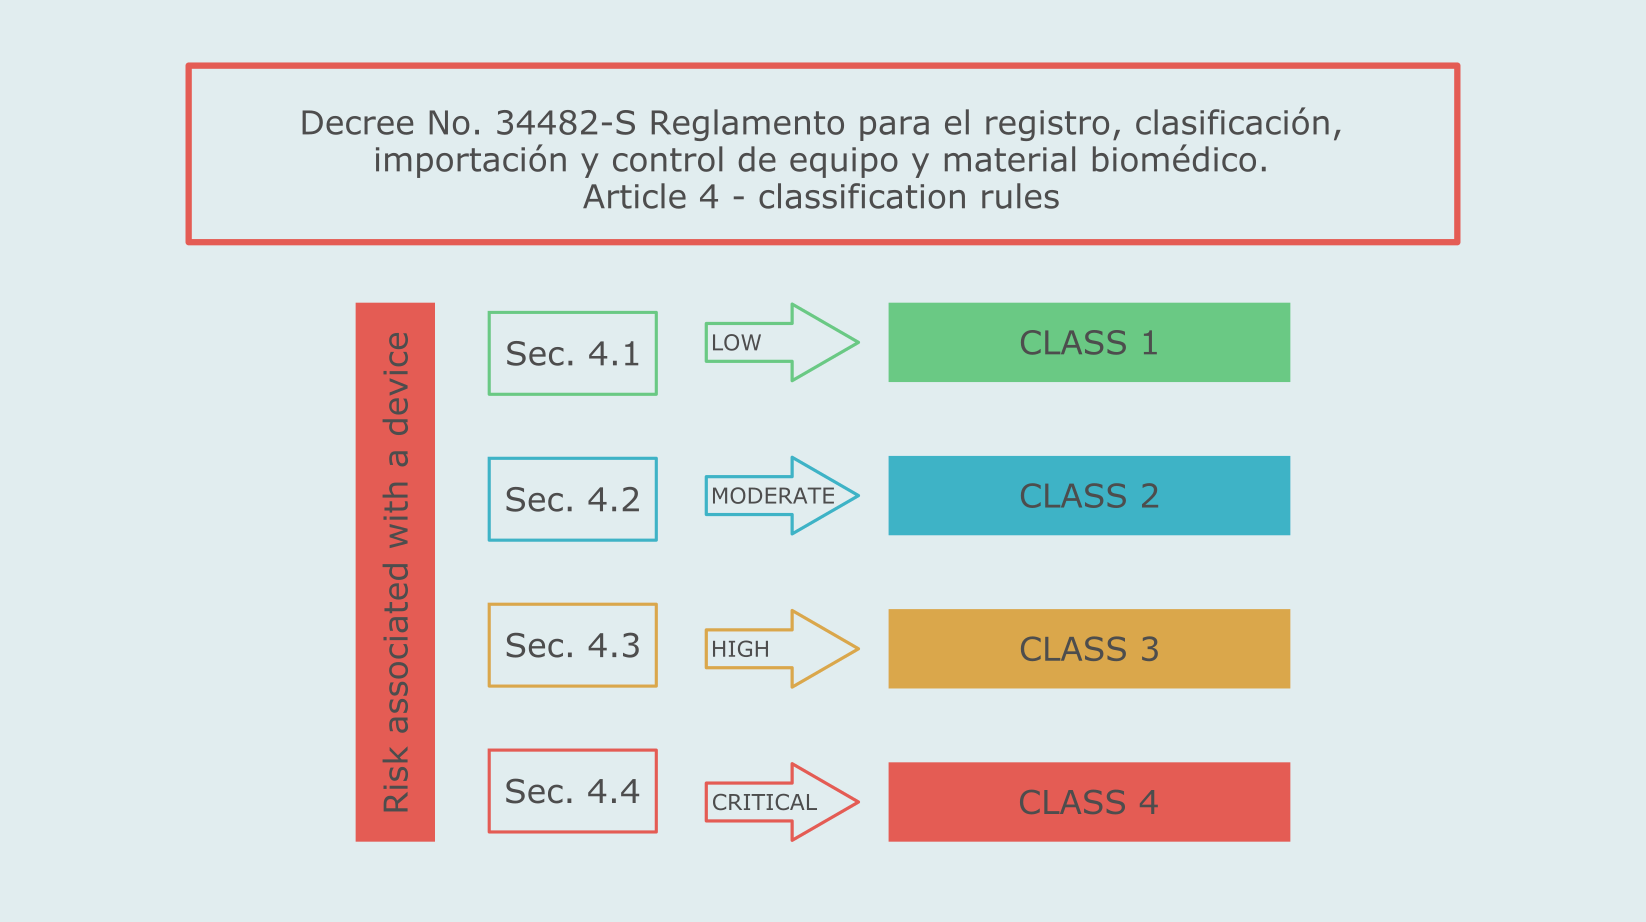 Medical device classification in Costa Rica